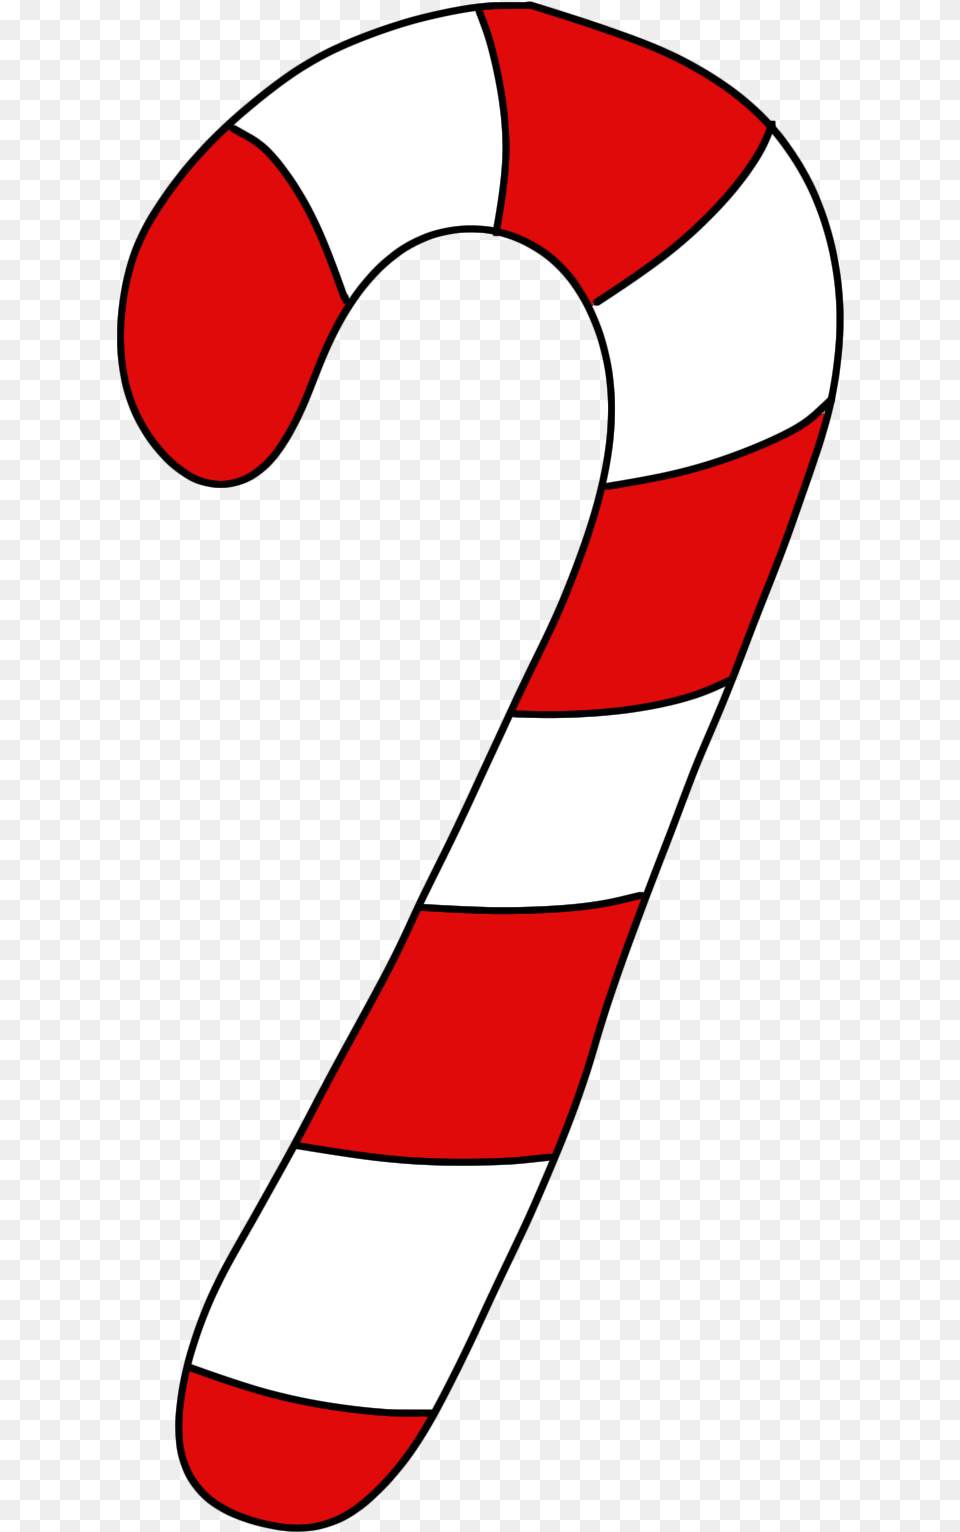 Free Candy Cane Clip Art Pictures Candy Cane Clipart, Food, Sweets, Stick Png